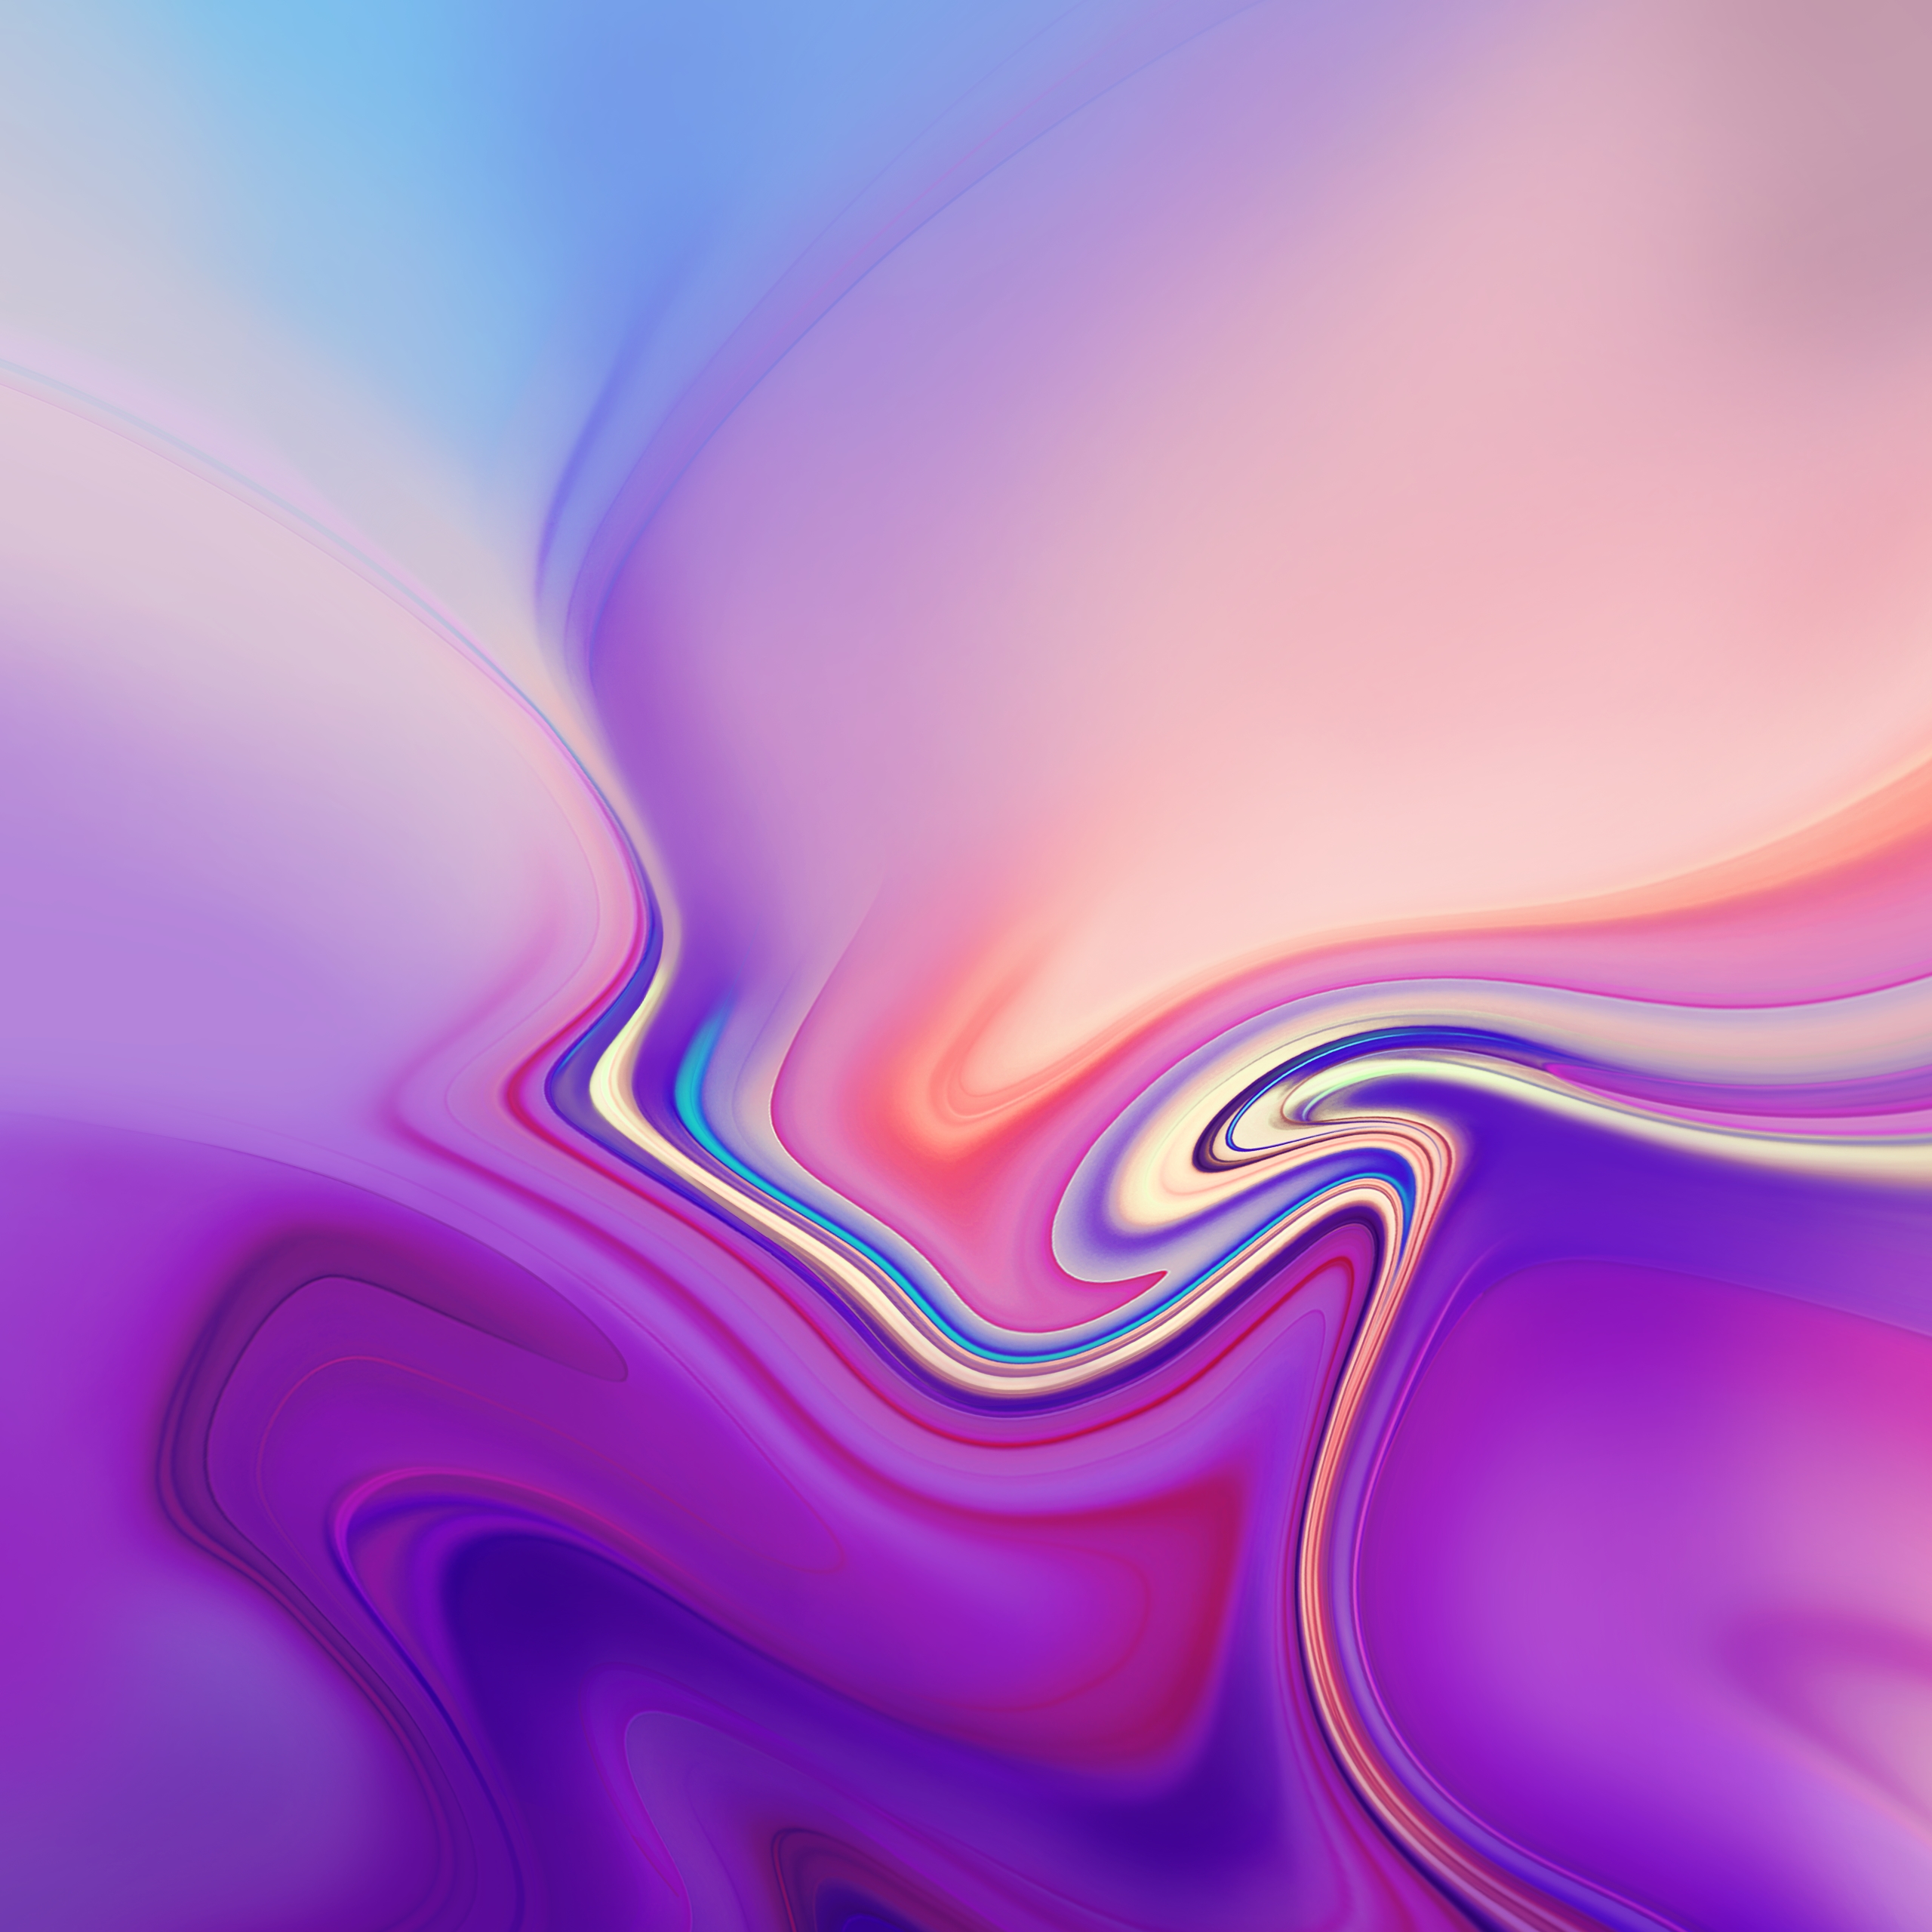 4K Note 9 Wallpapers